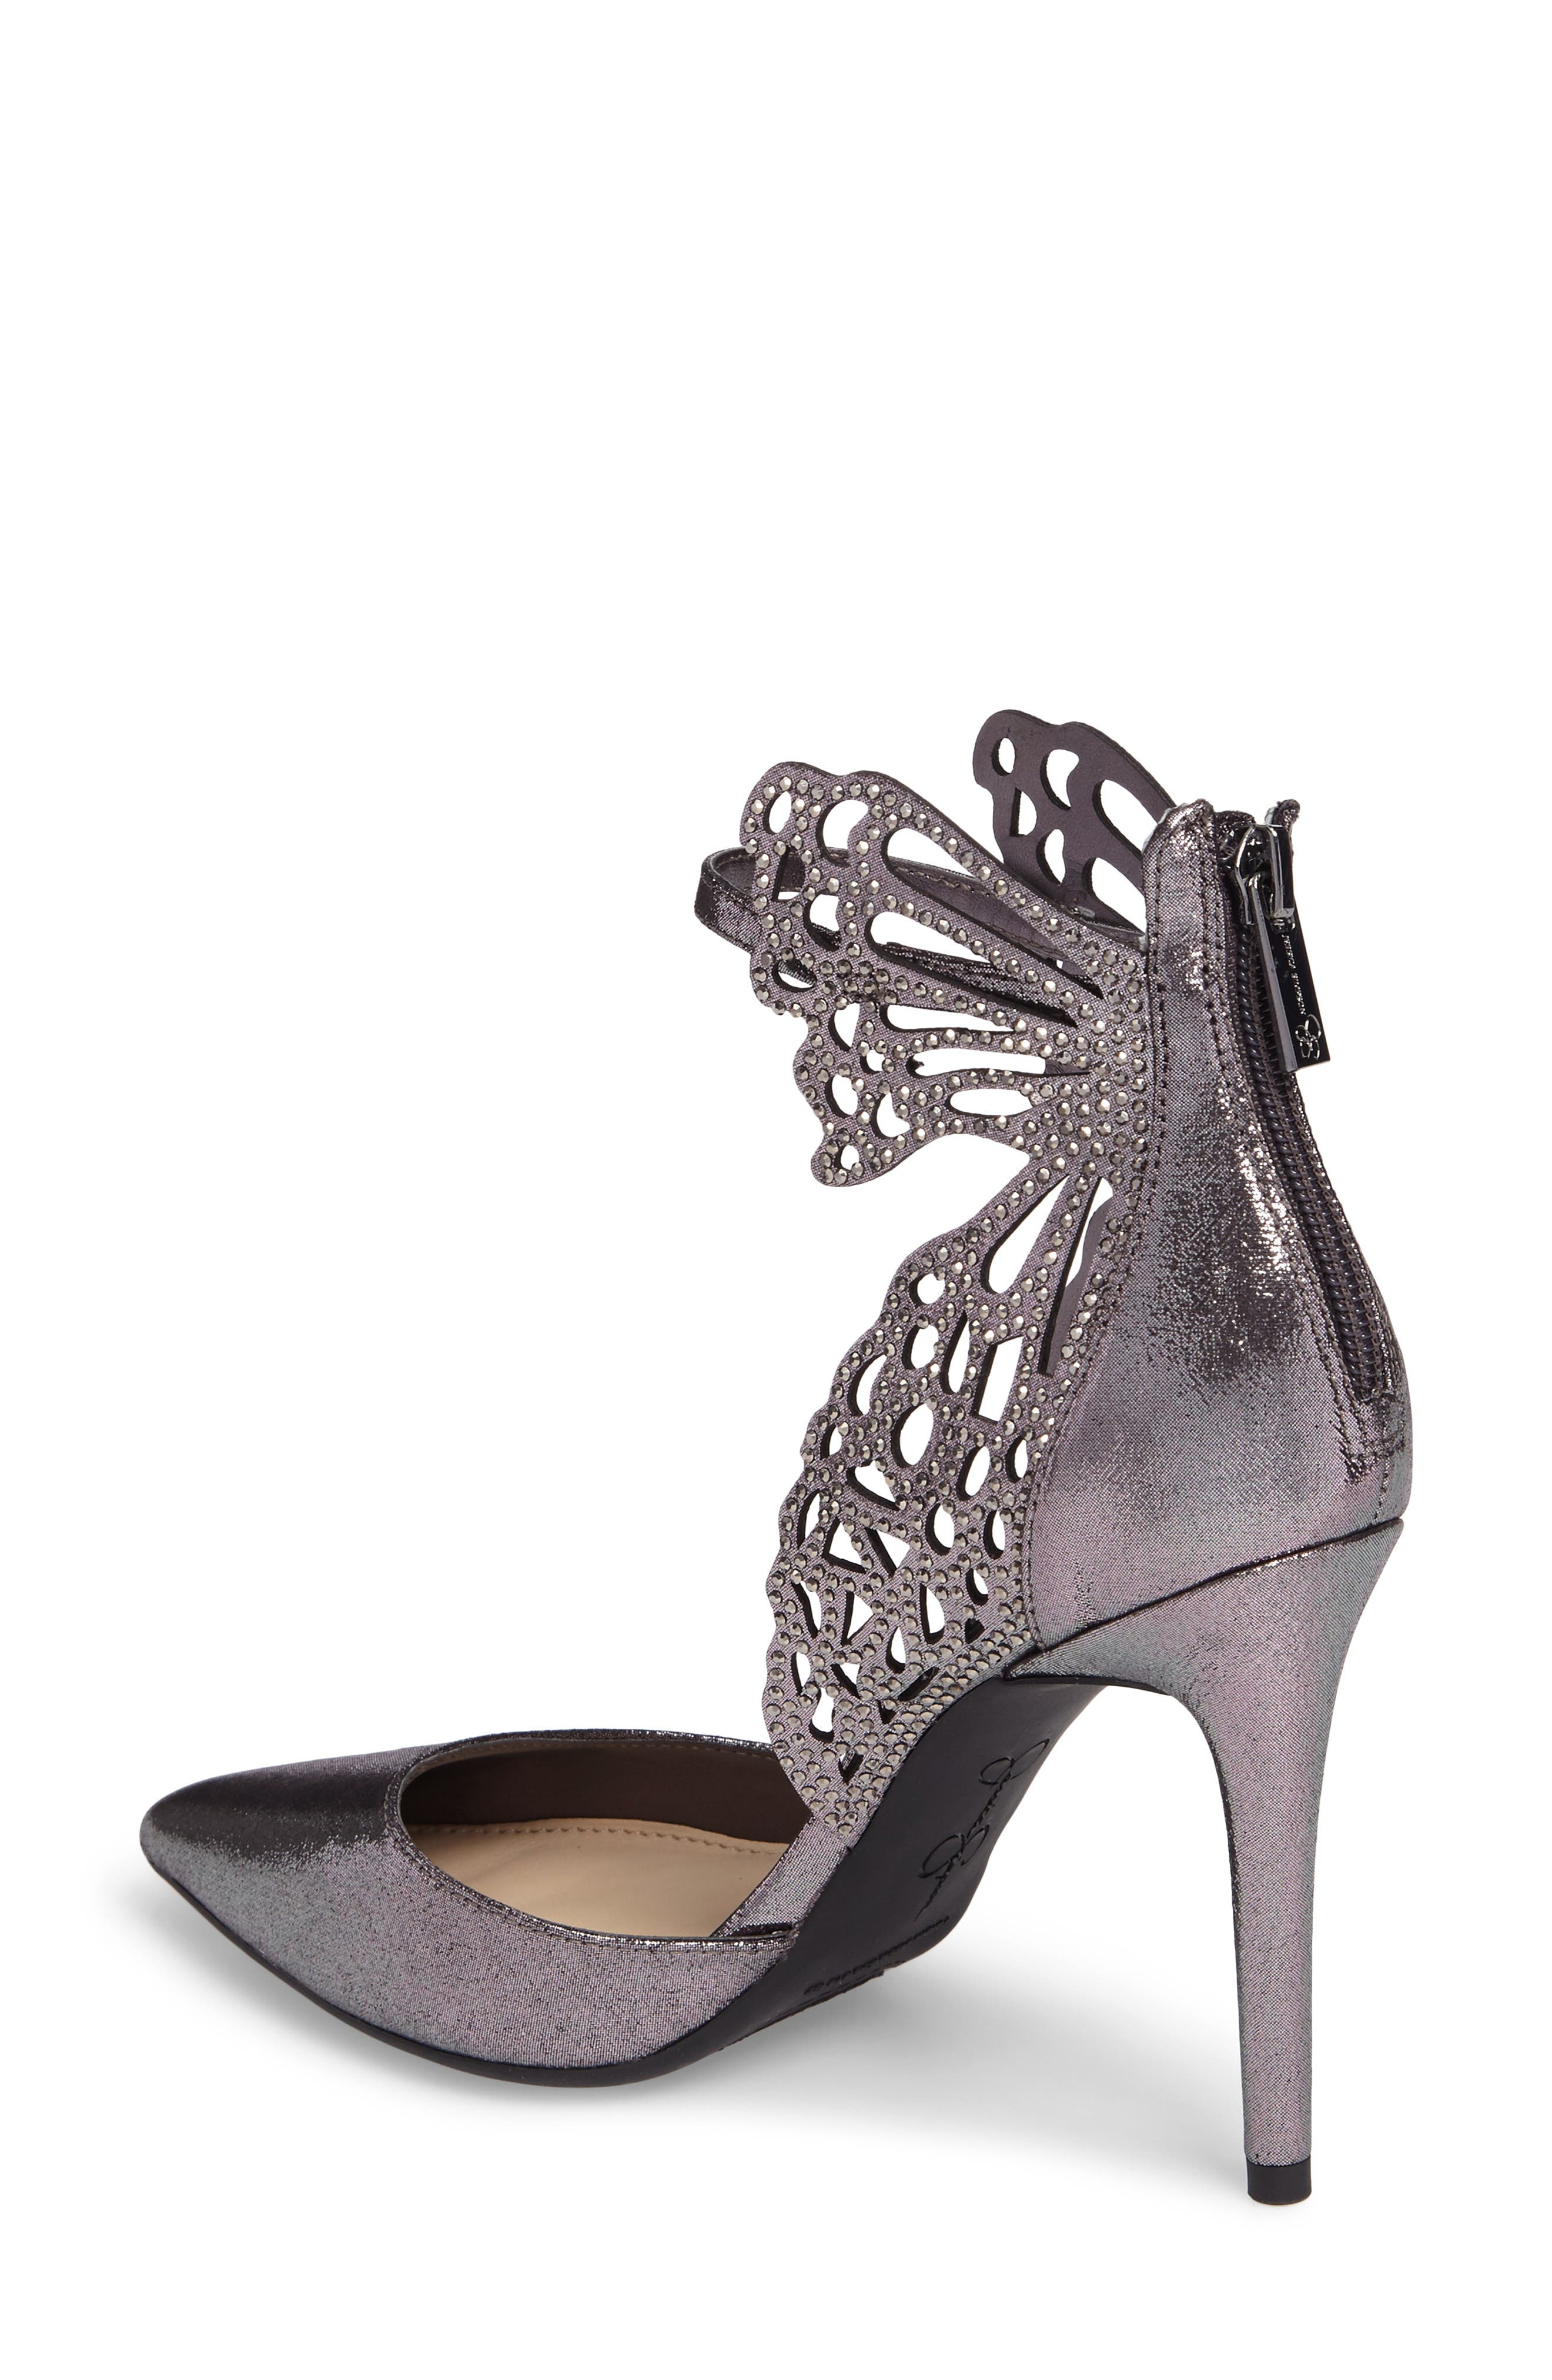 Jessica Simpson | Leasia Butterfly Pump 